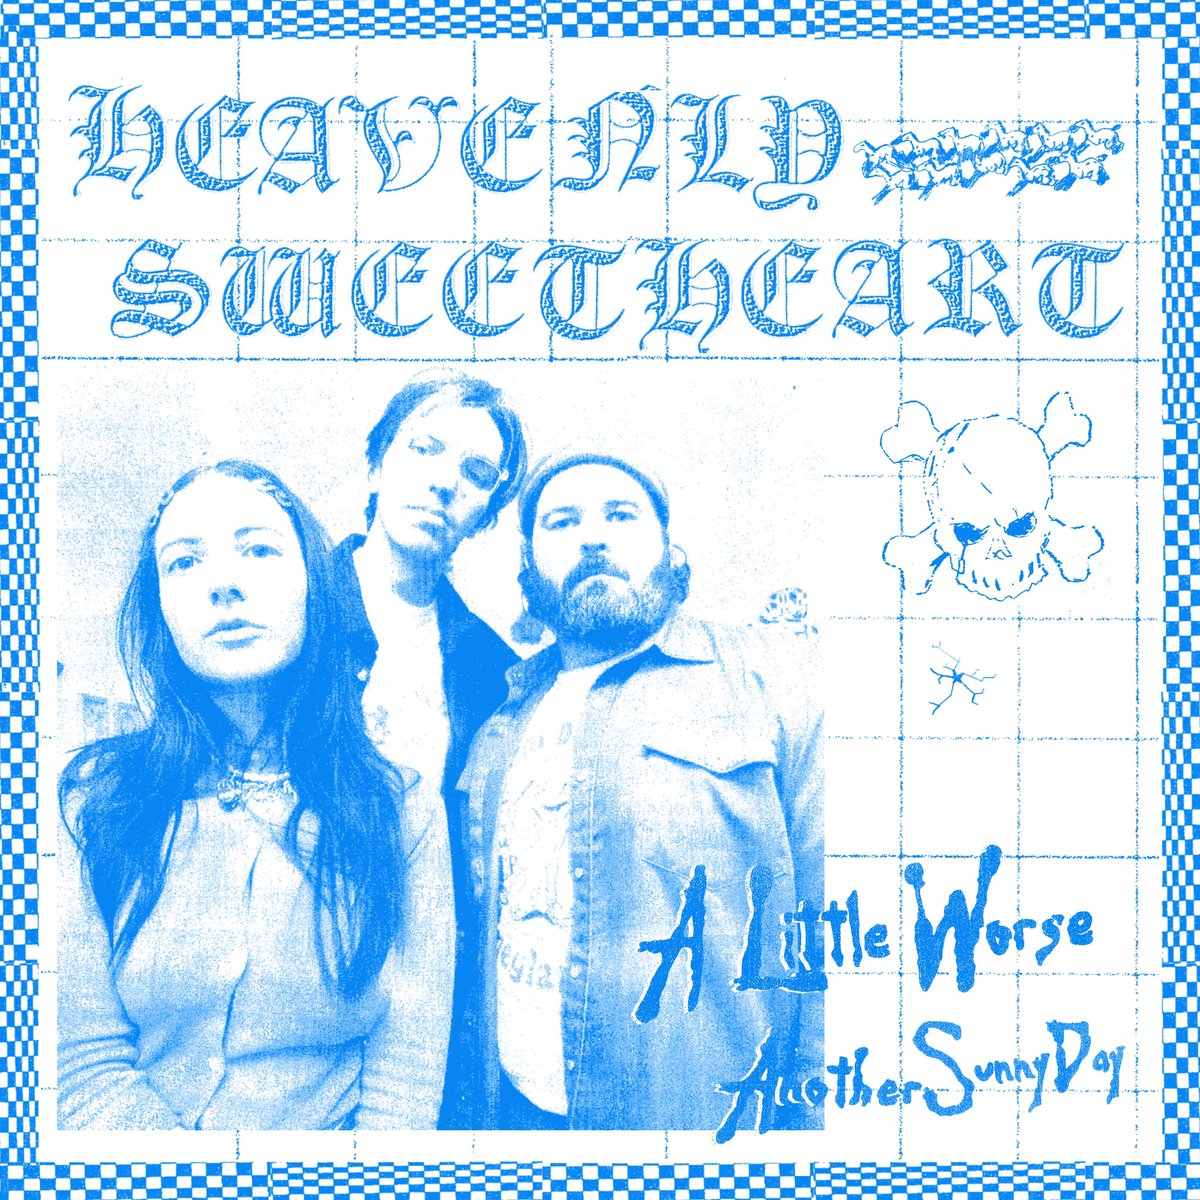 New Heavenly Sweetheart music out today! I recorded these songs at home with Sam and Sean. Mixed by Cameron Heck with art by @coolche69. 💙 heavenlysweetheart.bandcamp.com